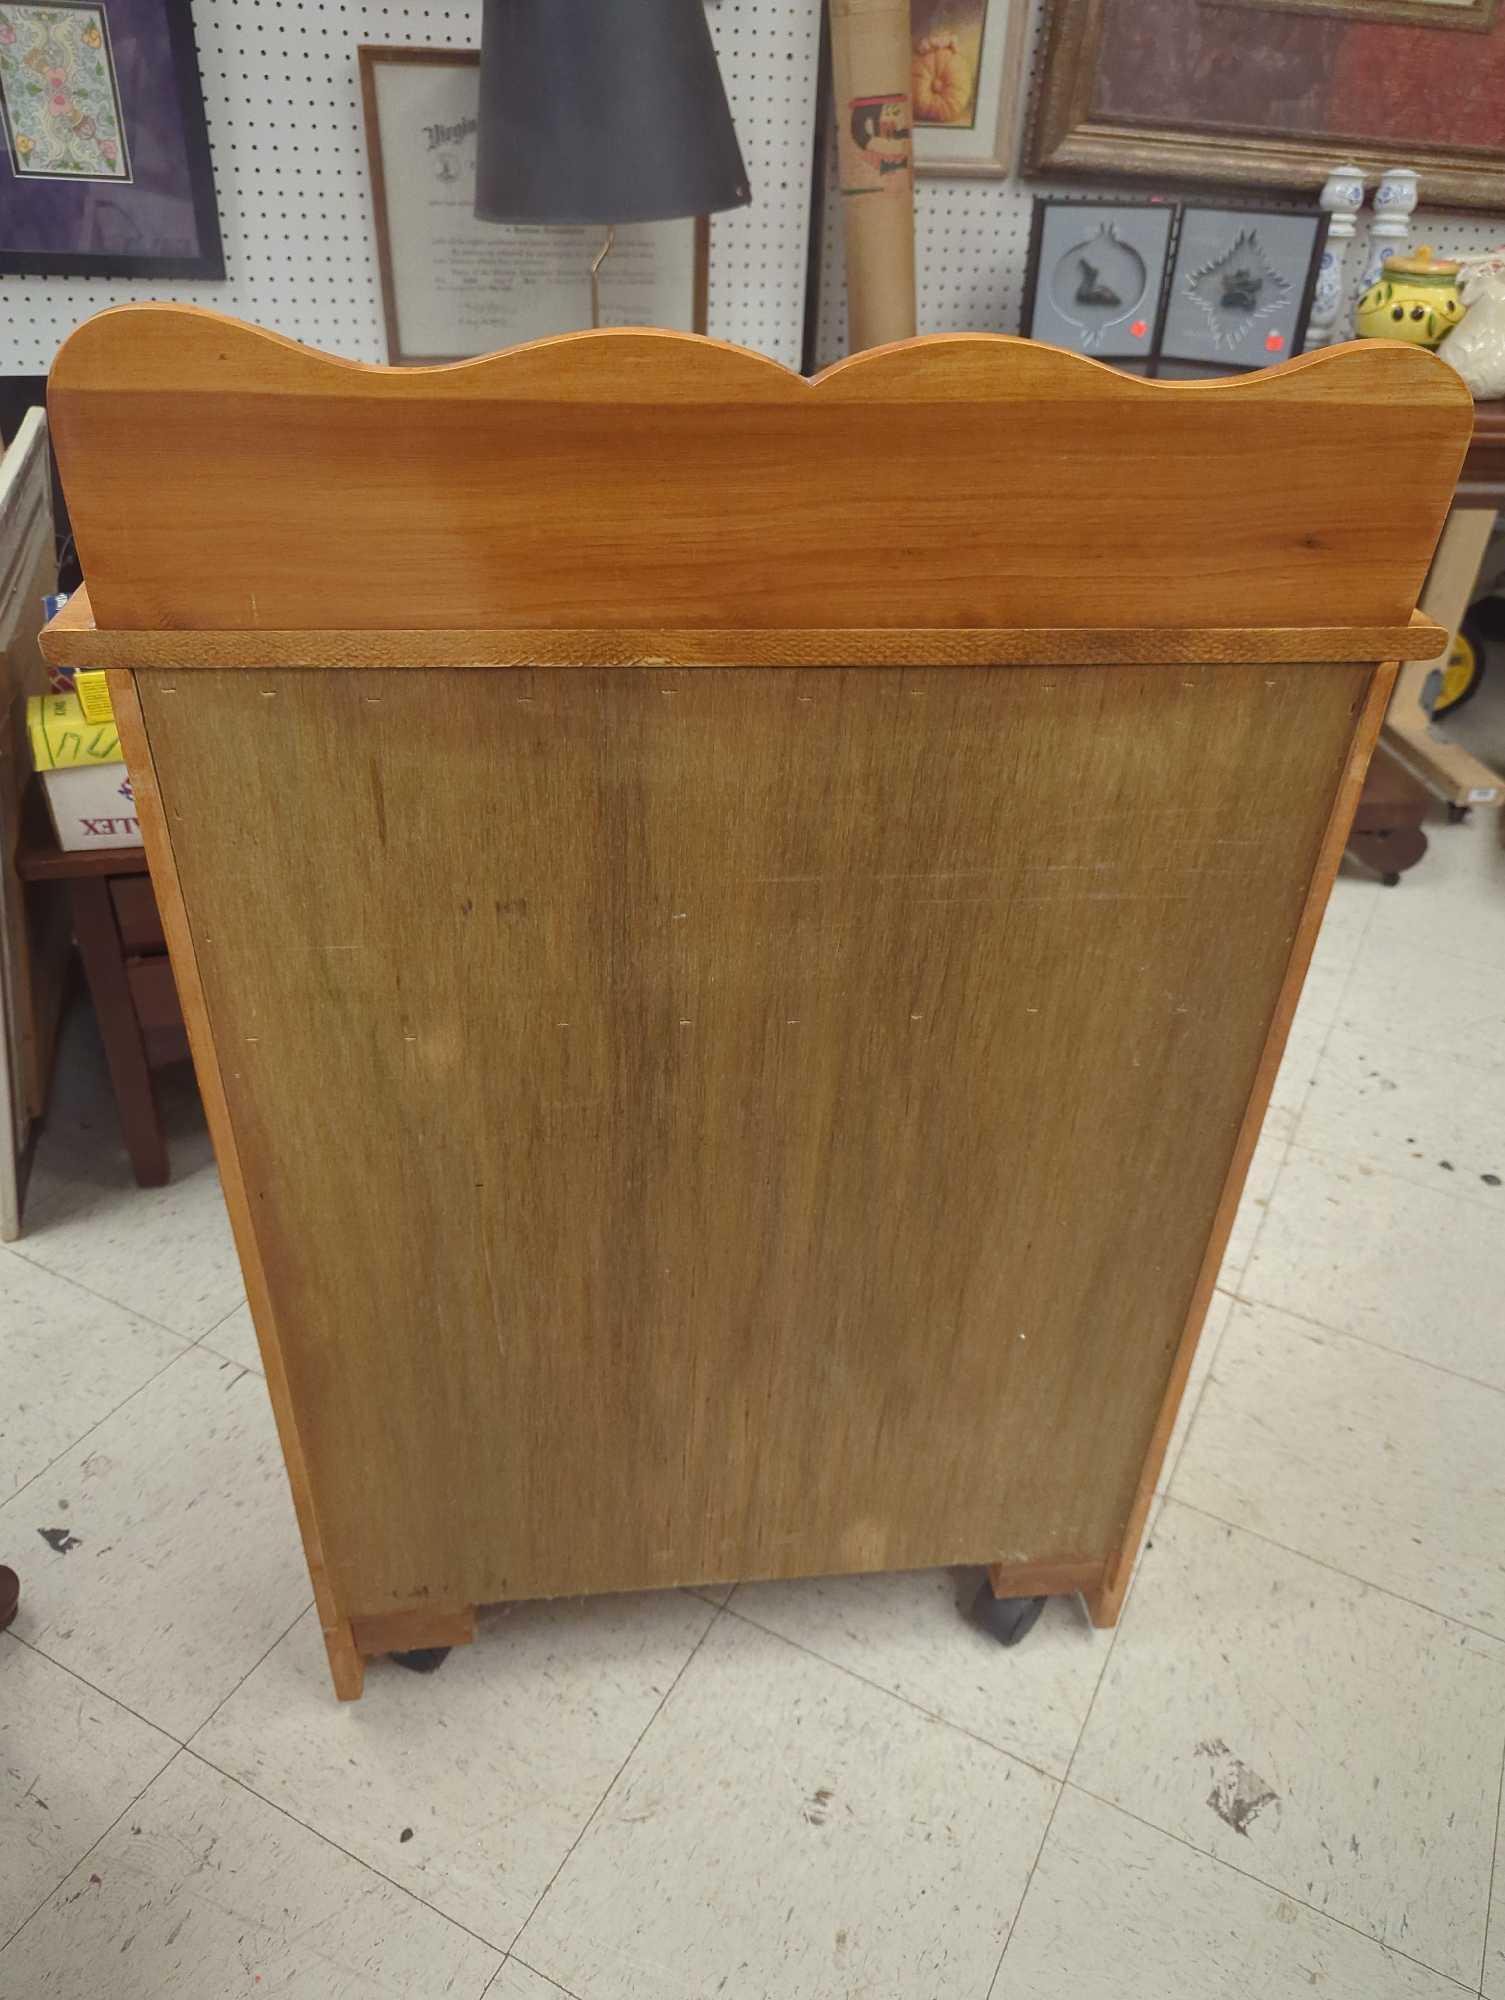 Old Style Knotty Pine Wash Basin with 2 Drawers and 2 Doors, Approximate Dimensions - 40" H x 27" W